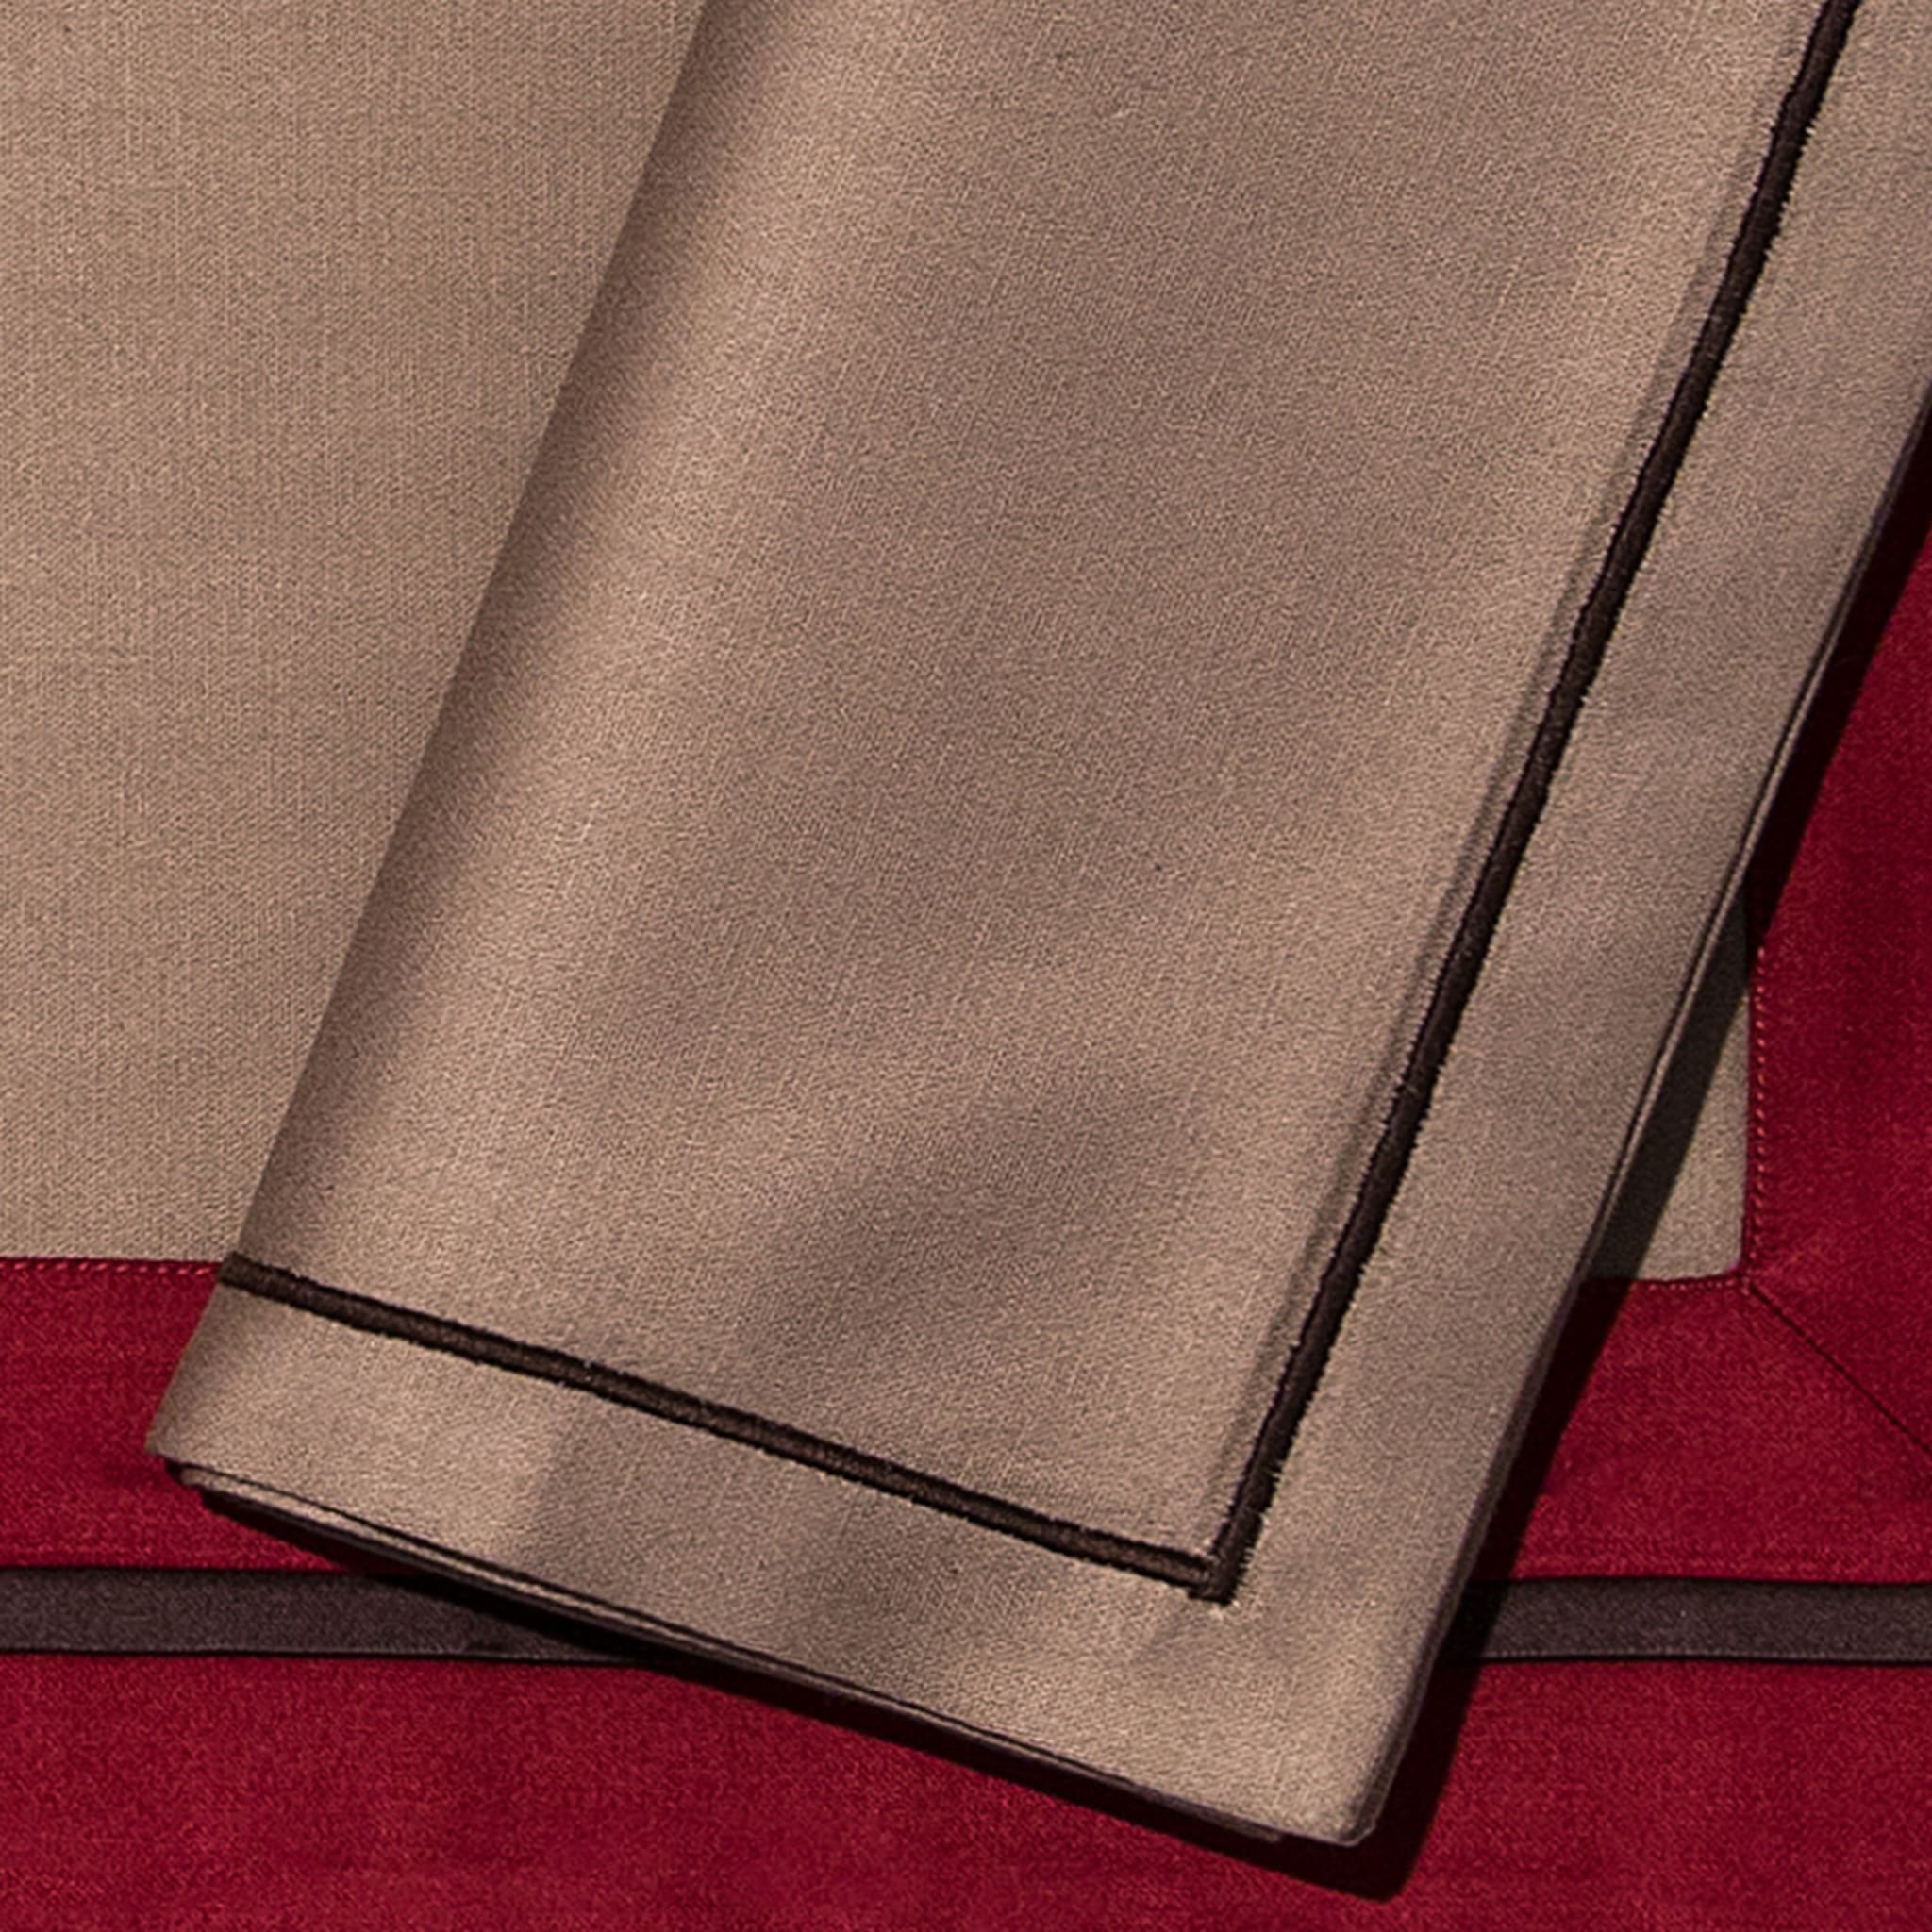 Placemats and Napkins - Red and Beige - Alternative view 2